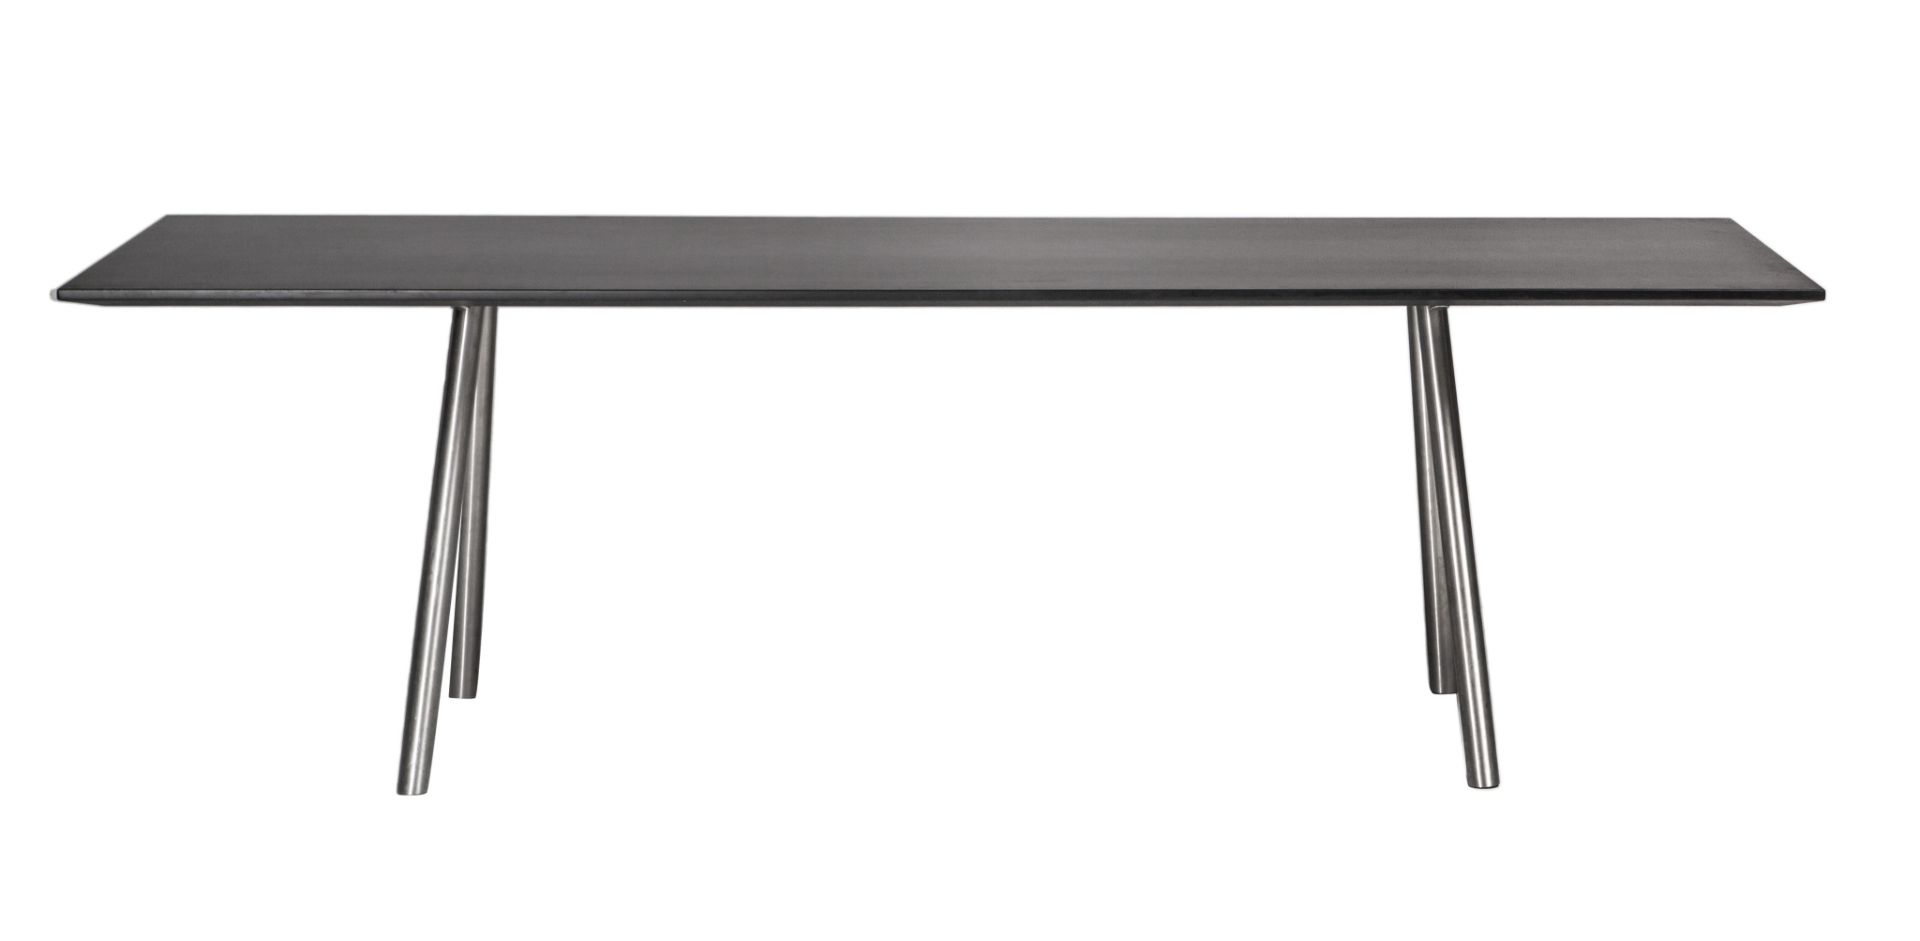 An A-Table by Maarten van Severen for Vitra, H 72,5 - W 240 - D 90 cm - Image 17 of 22